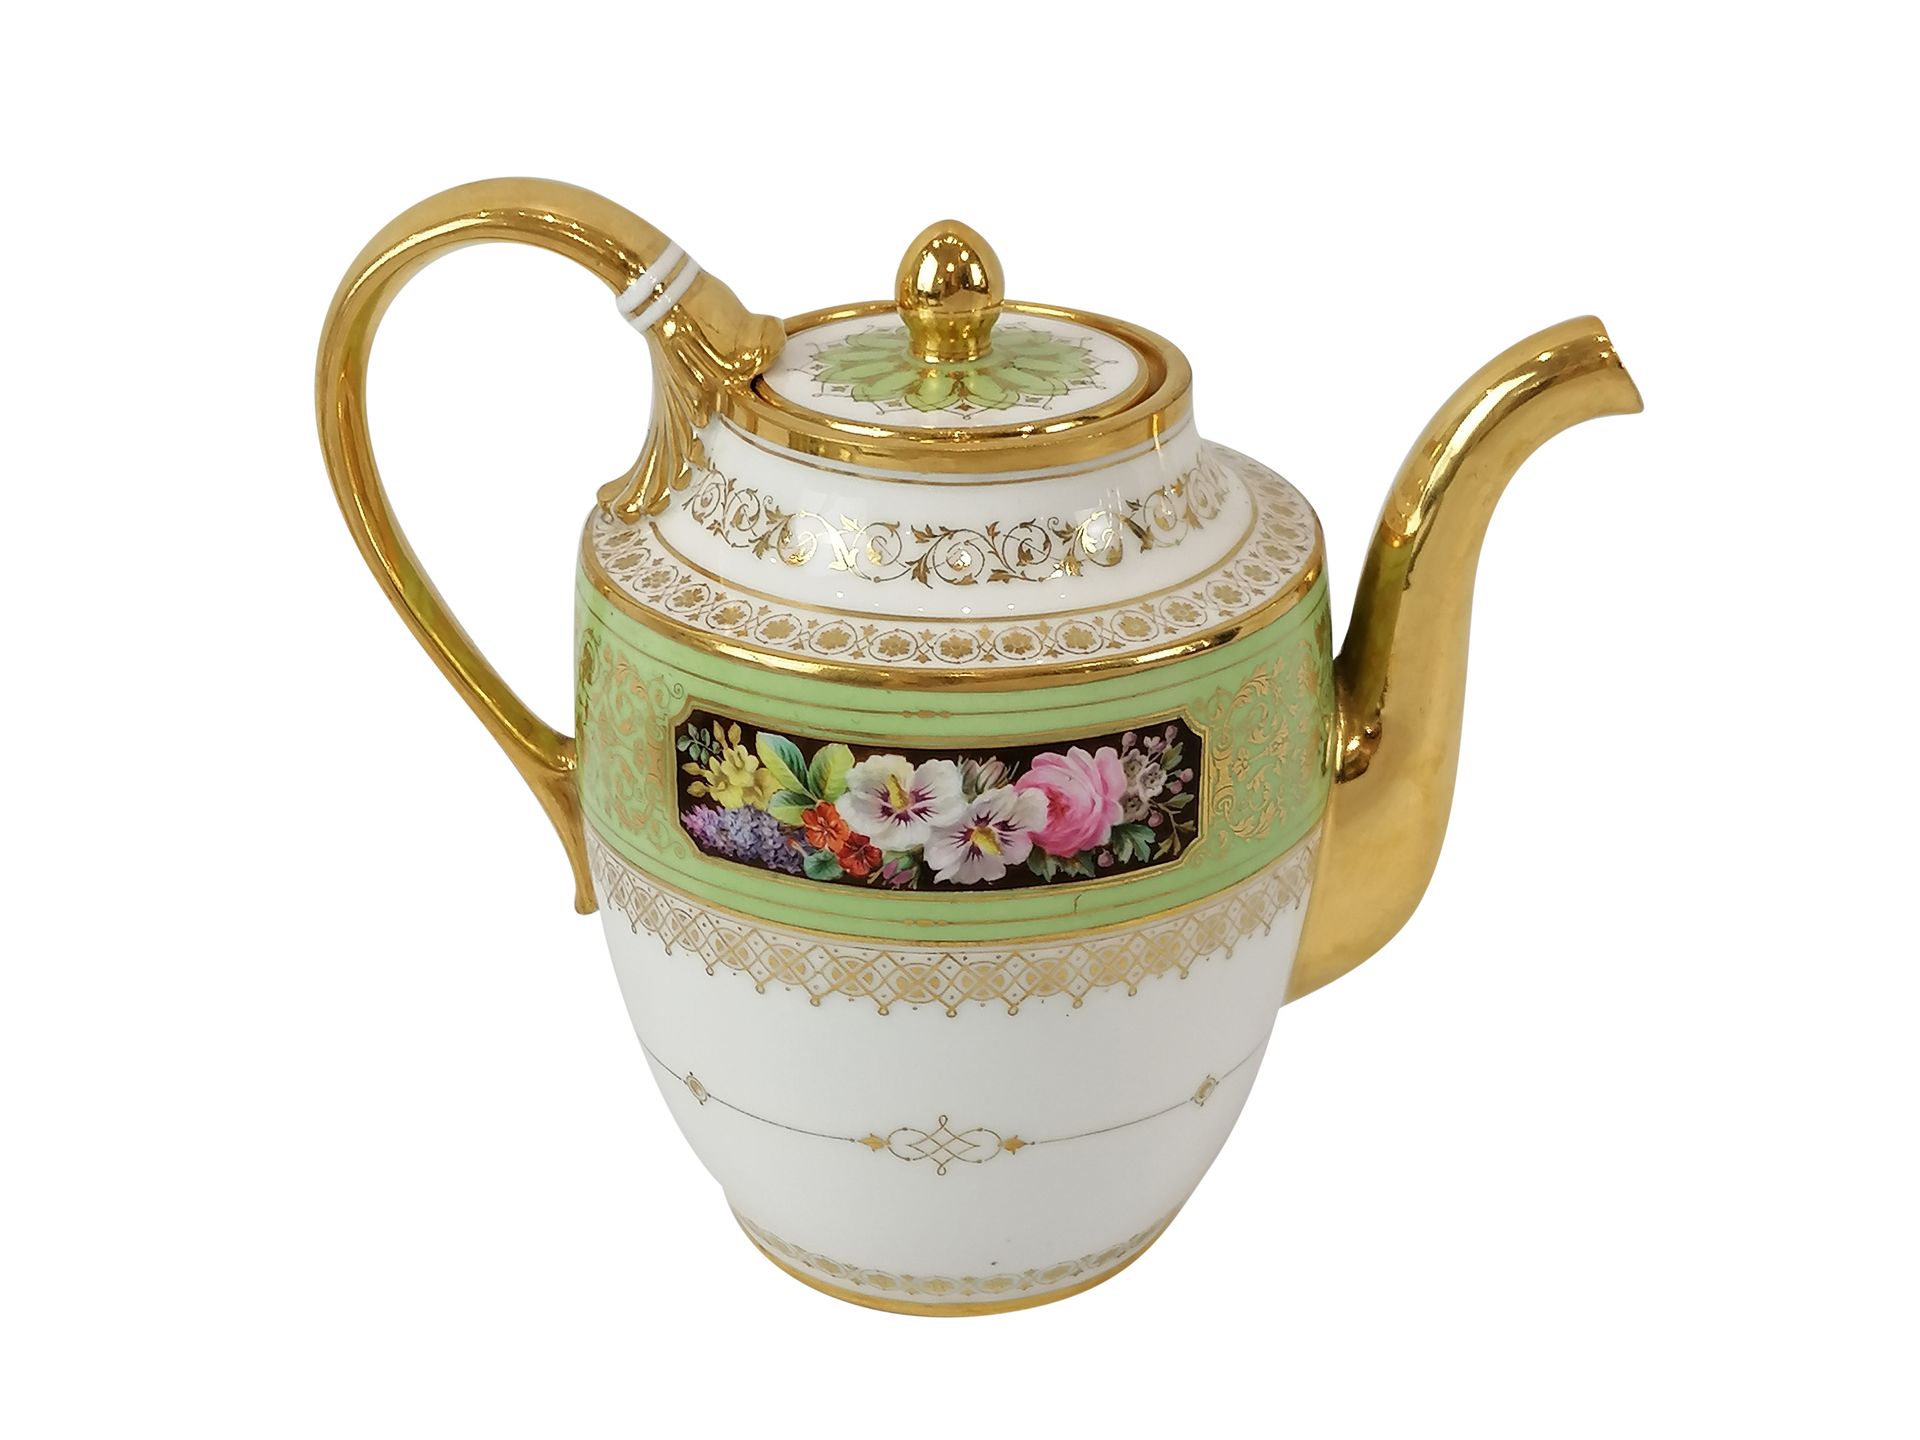 Null TEAPOT OF THE SERVICE OF THE KING LOUIS-PHILIPPE IN THE CASTLE OF EU
Pestum&hellip;